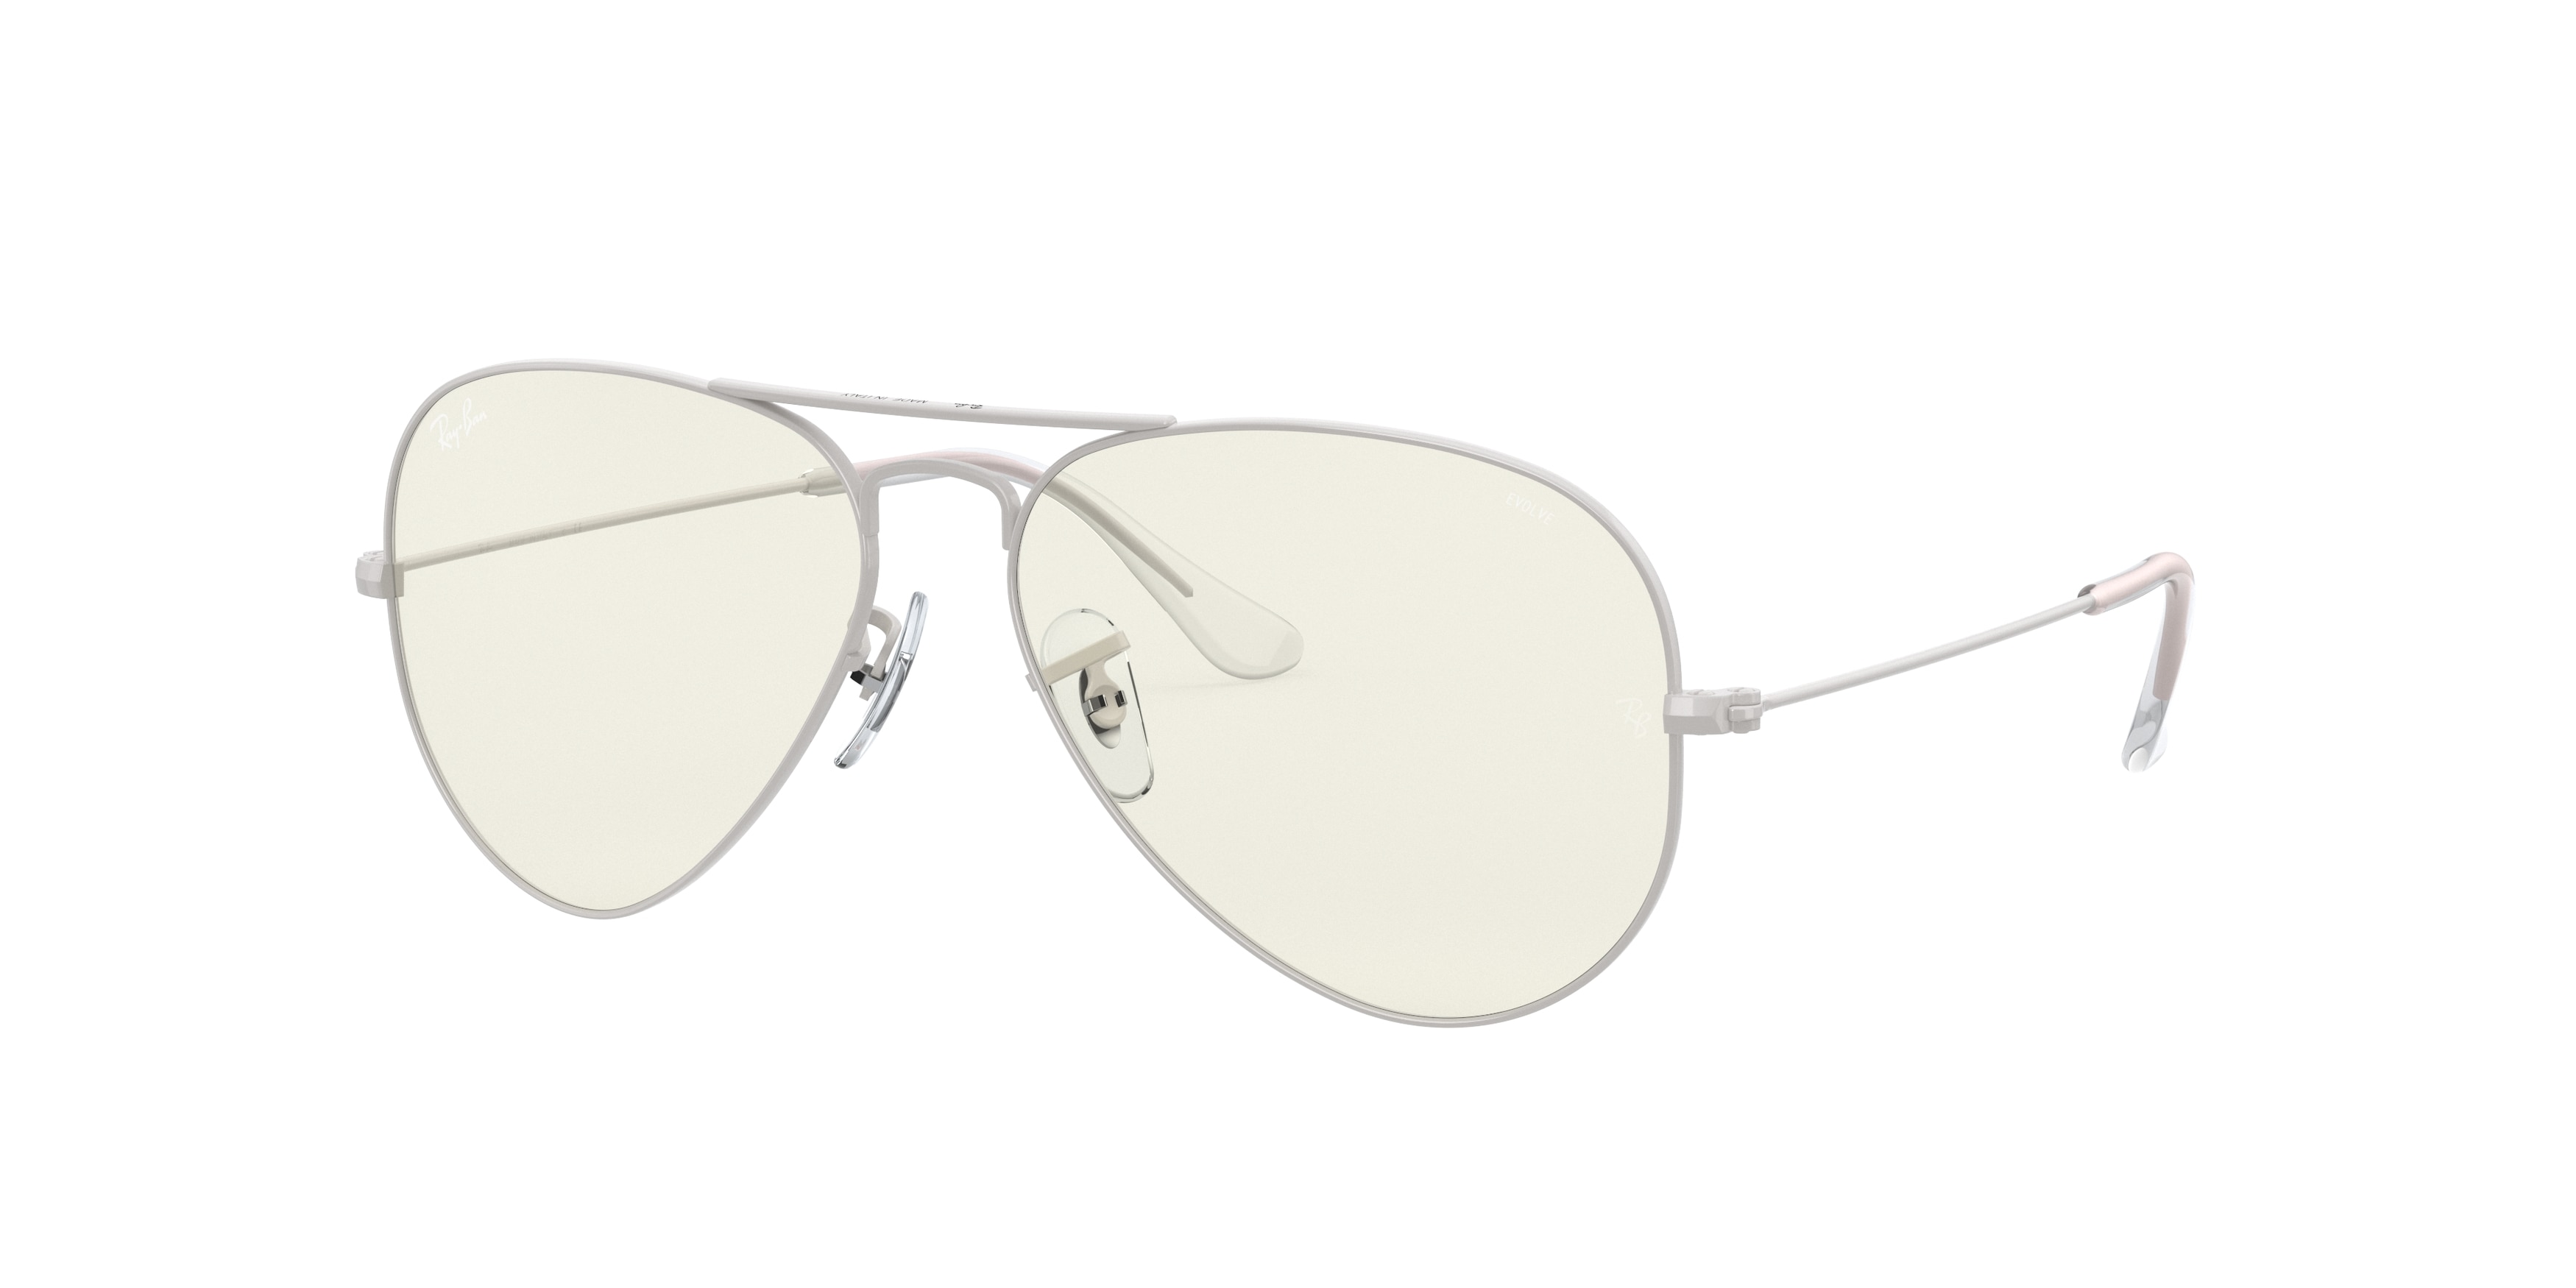 Ray-ban Aviator Large Metal RB3025 9223BL Light Grey (Clear Photochromic Grey with Blue-Light Filter)